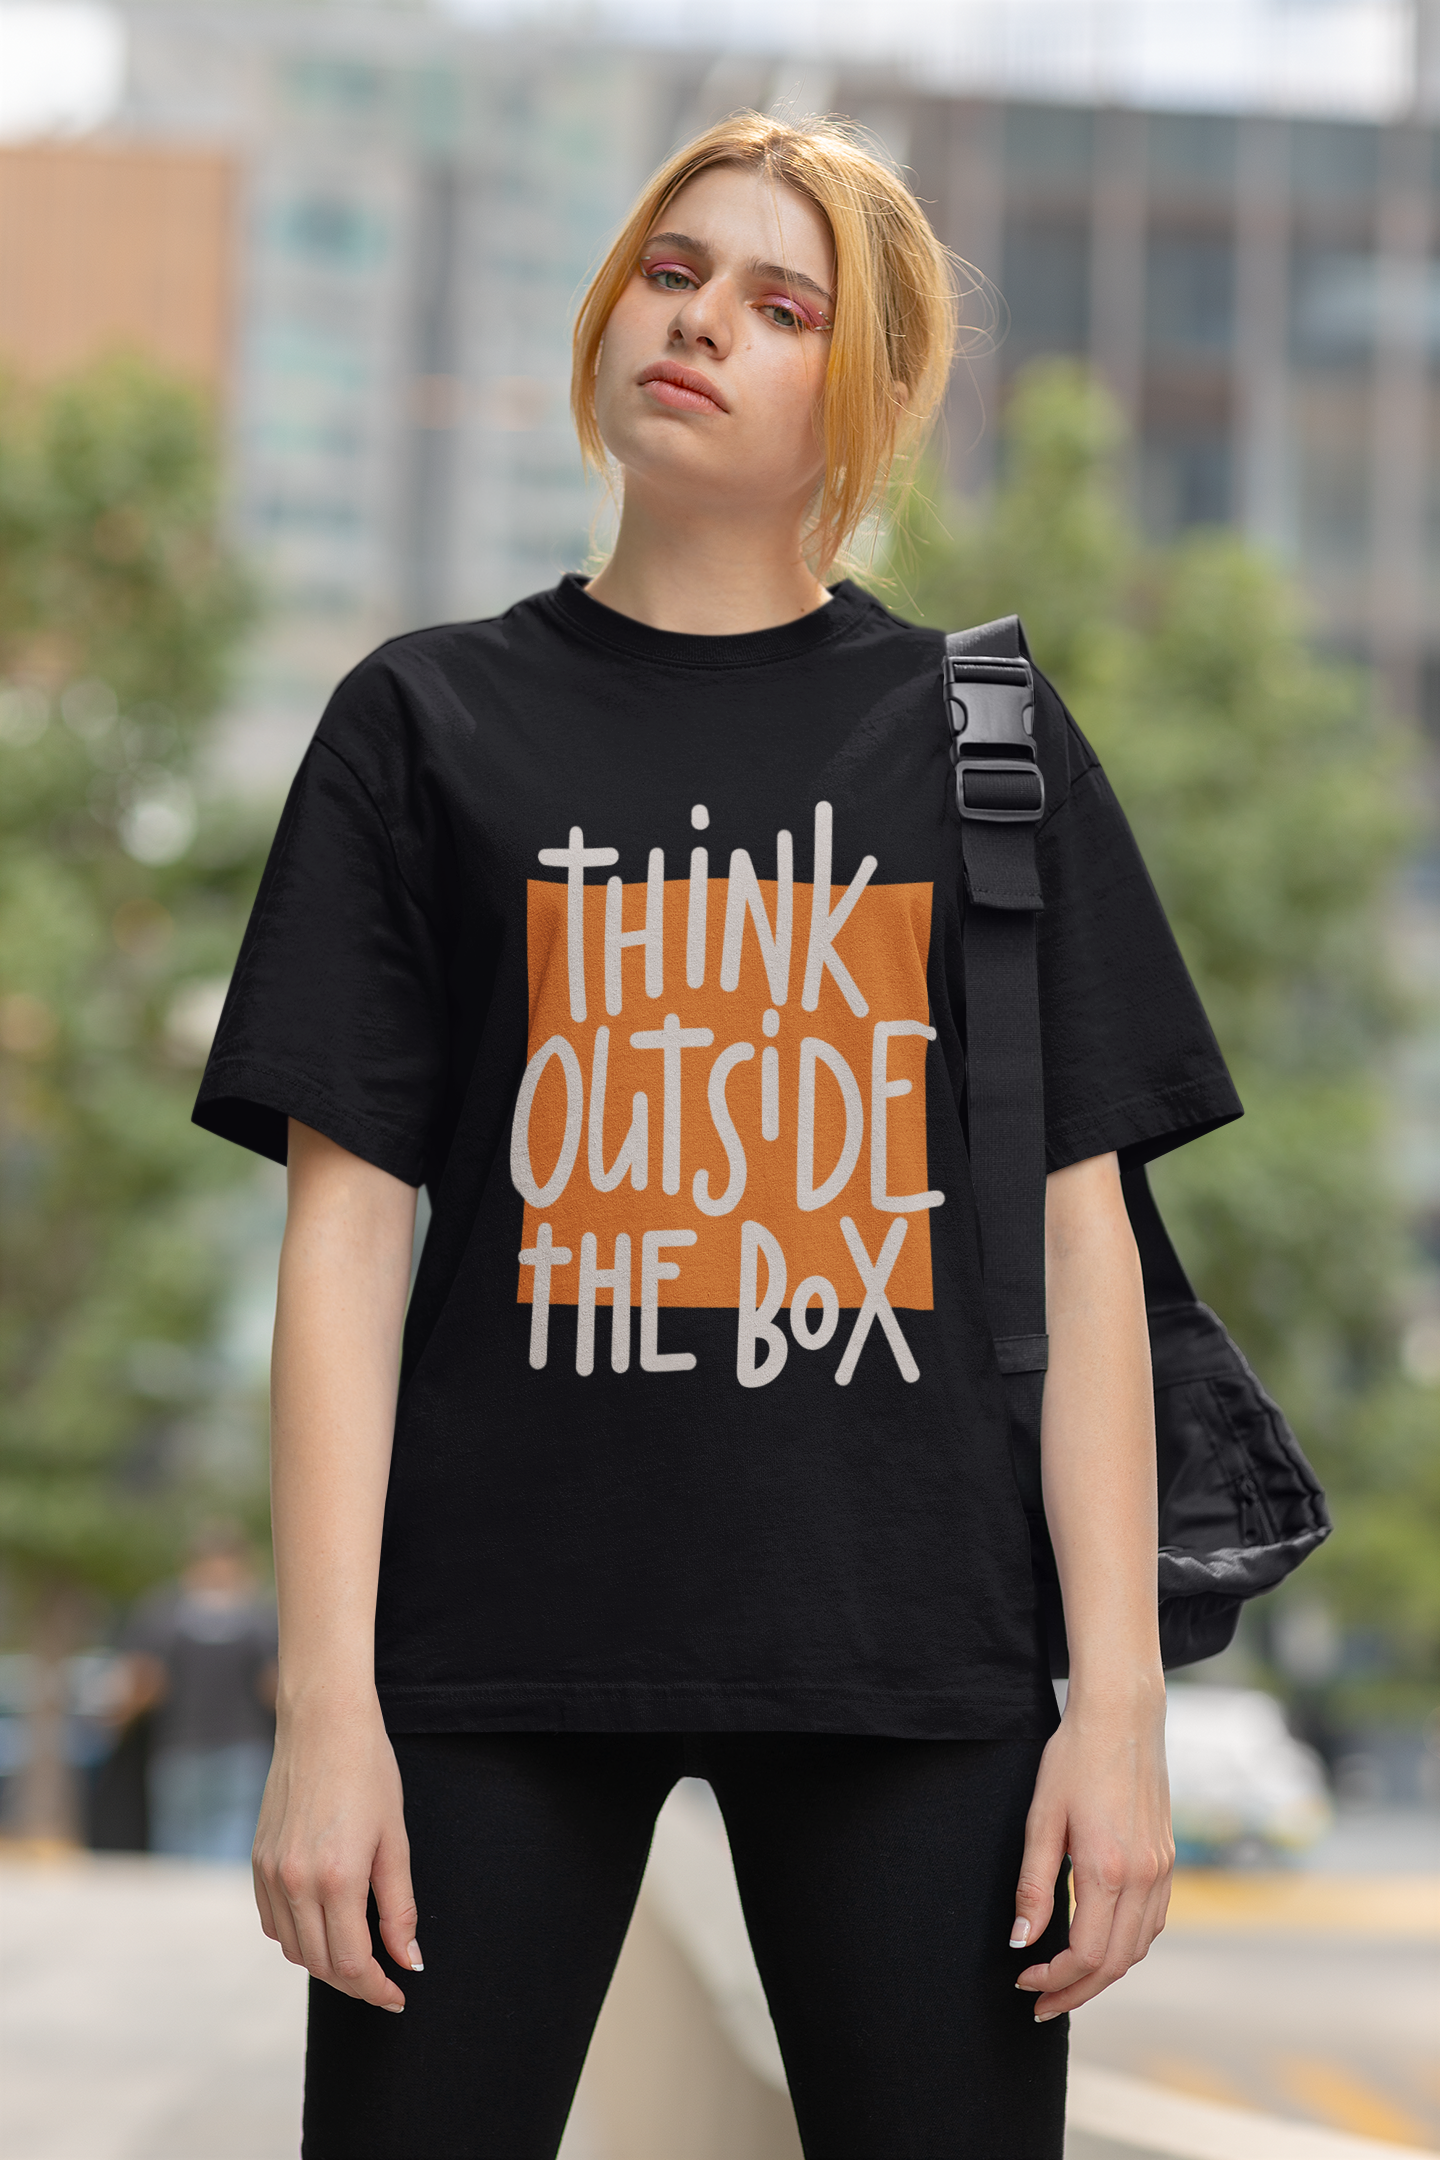 Think the box- Oversized T-shirt by ANTHERR